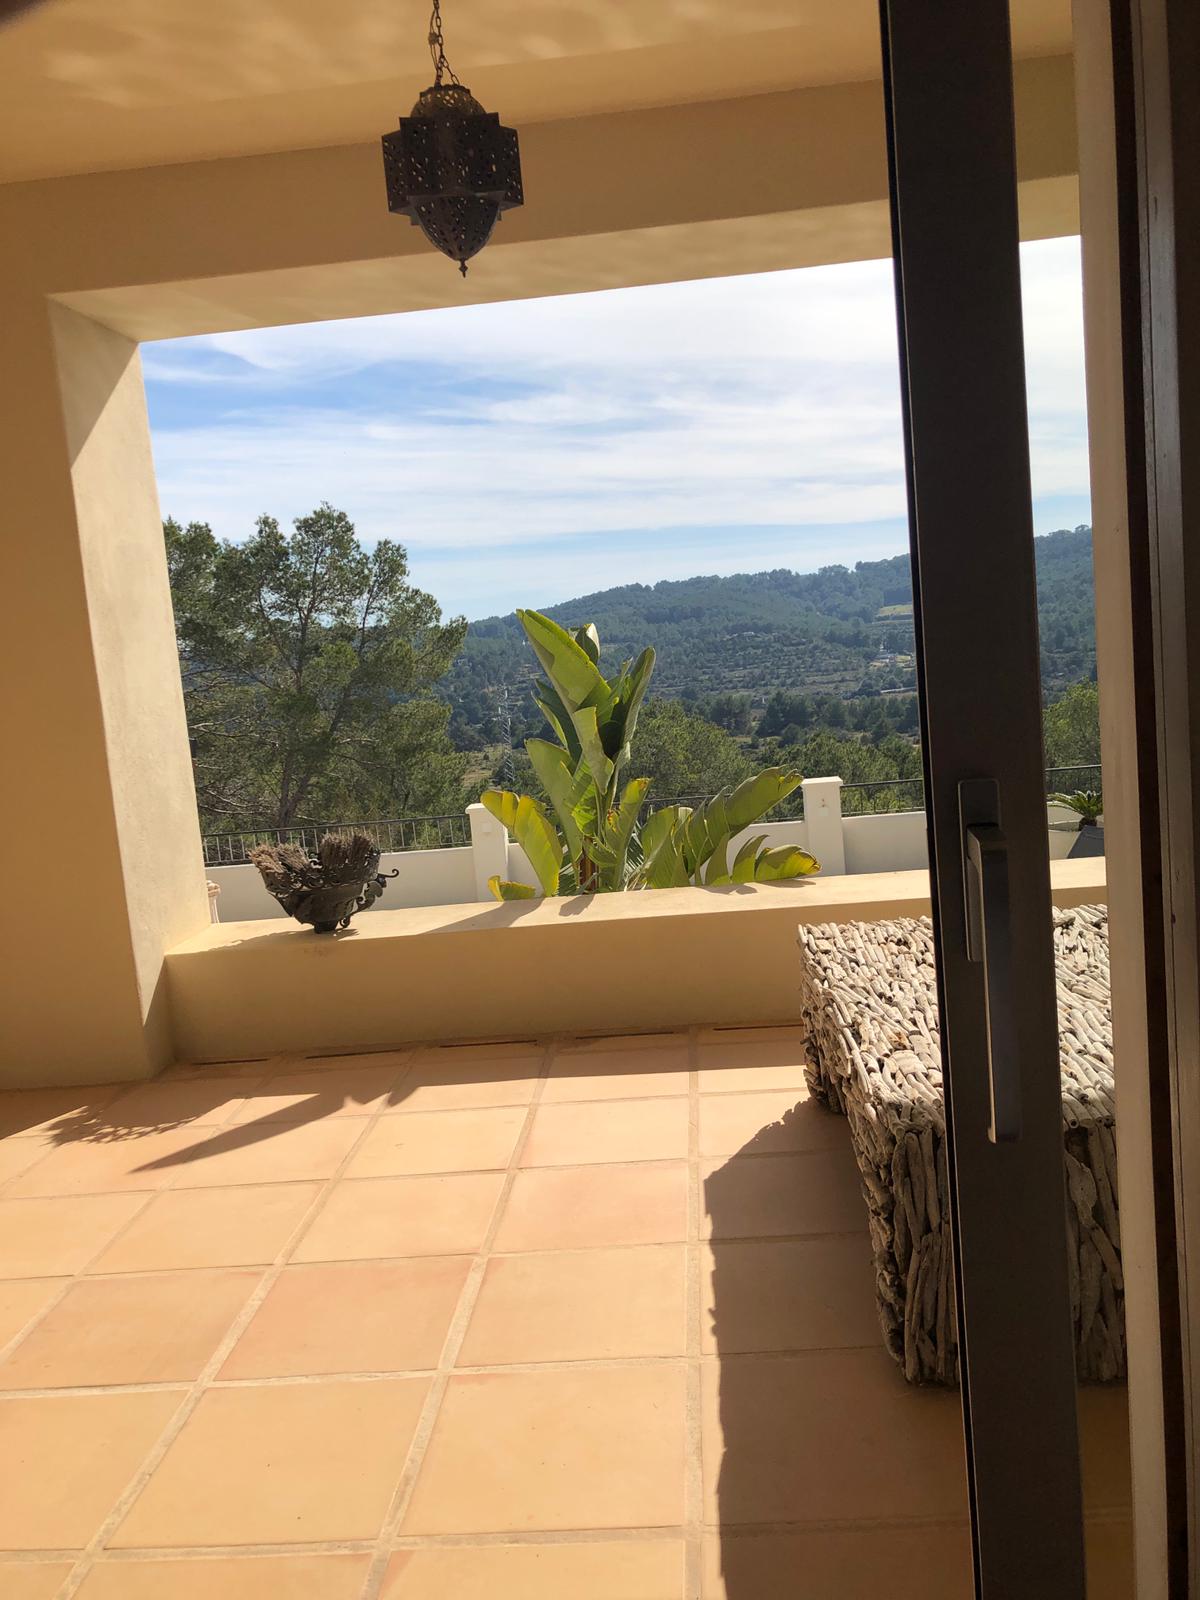 Beautiful house with great views in Santa Gertrudes